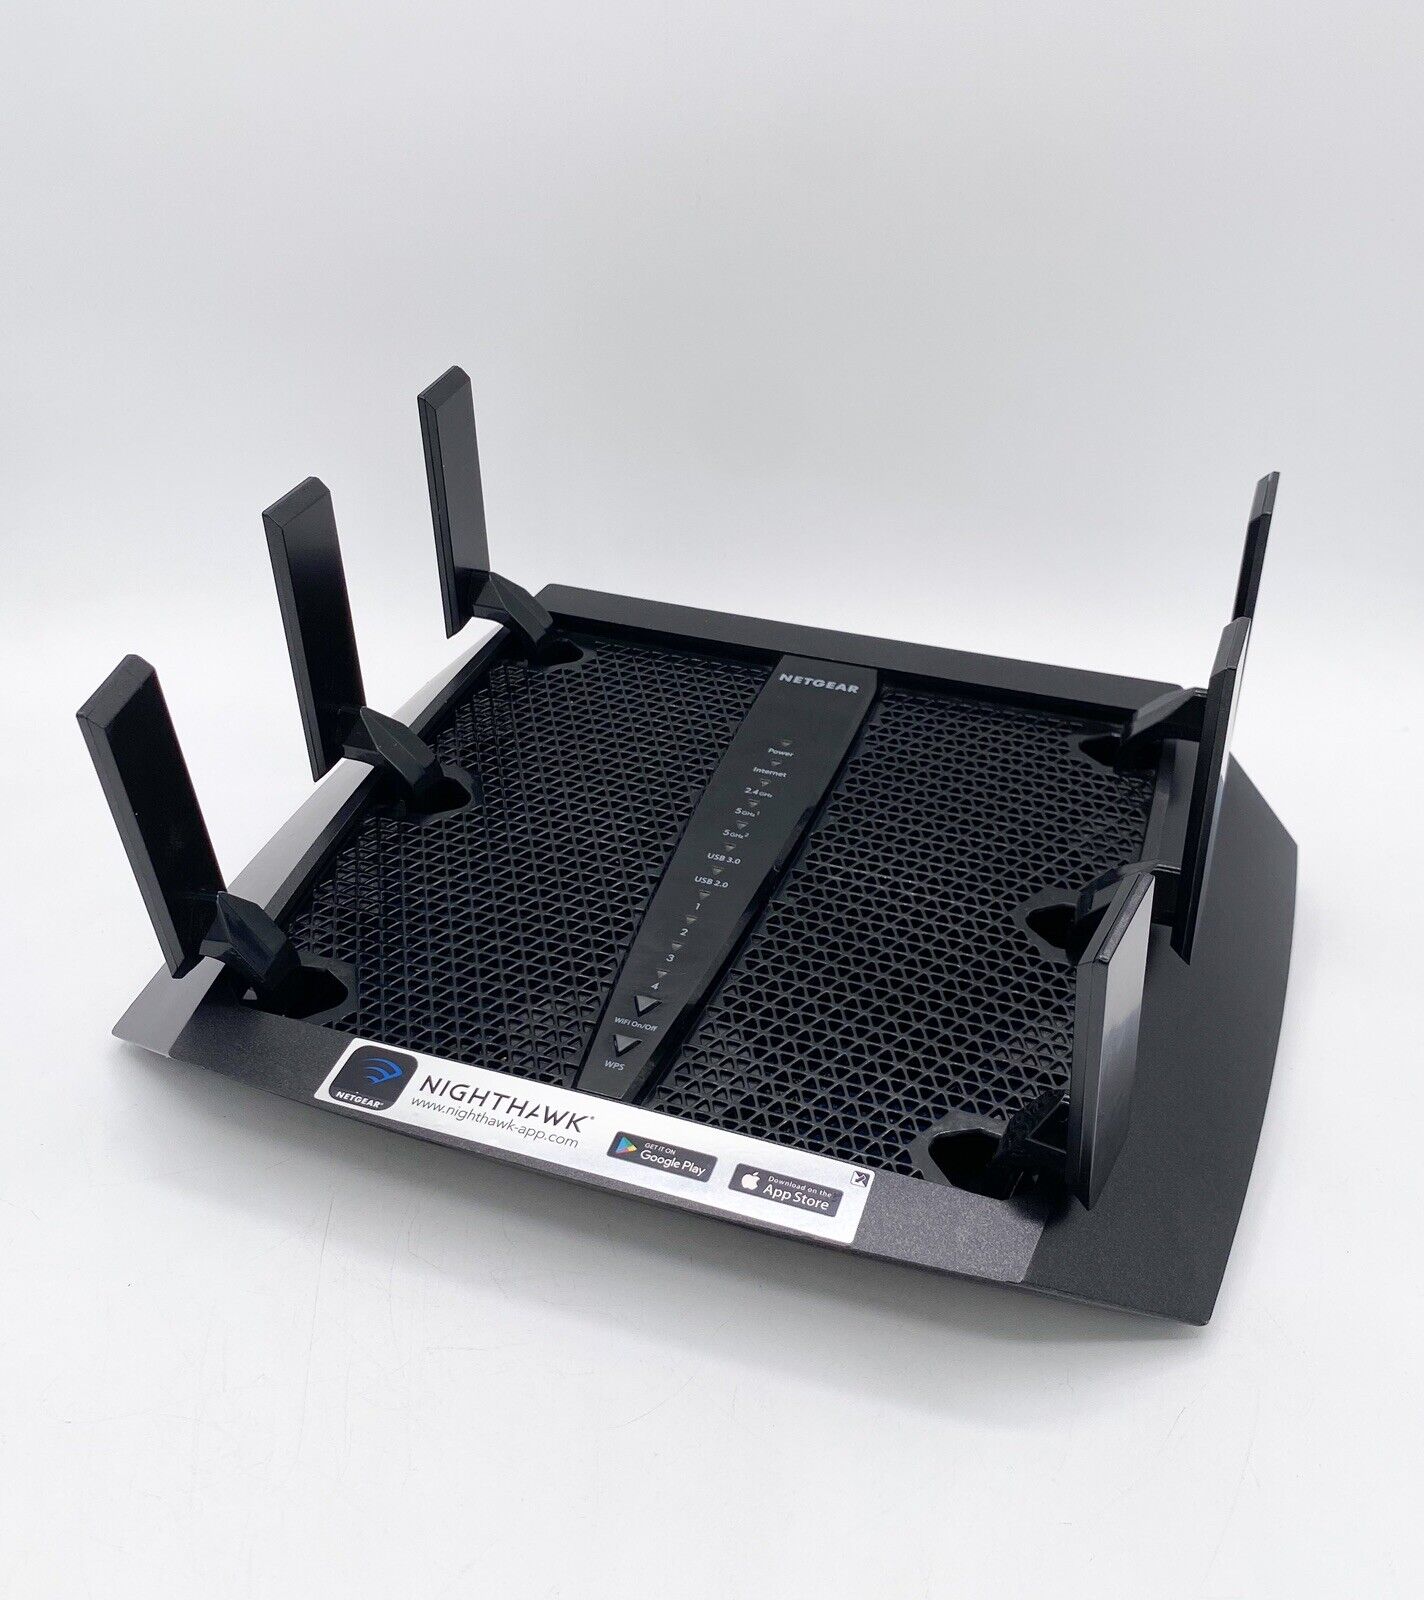 Netgear R8000P NightHawk X6S AC4000 Tri-Band WiFi Router 4.0Gbps ROUTER ONLY